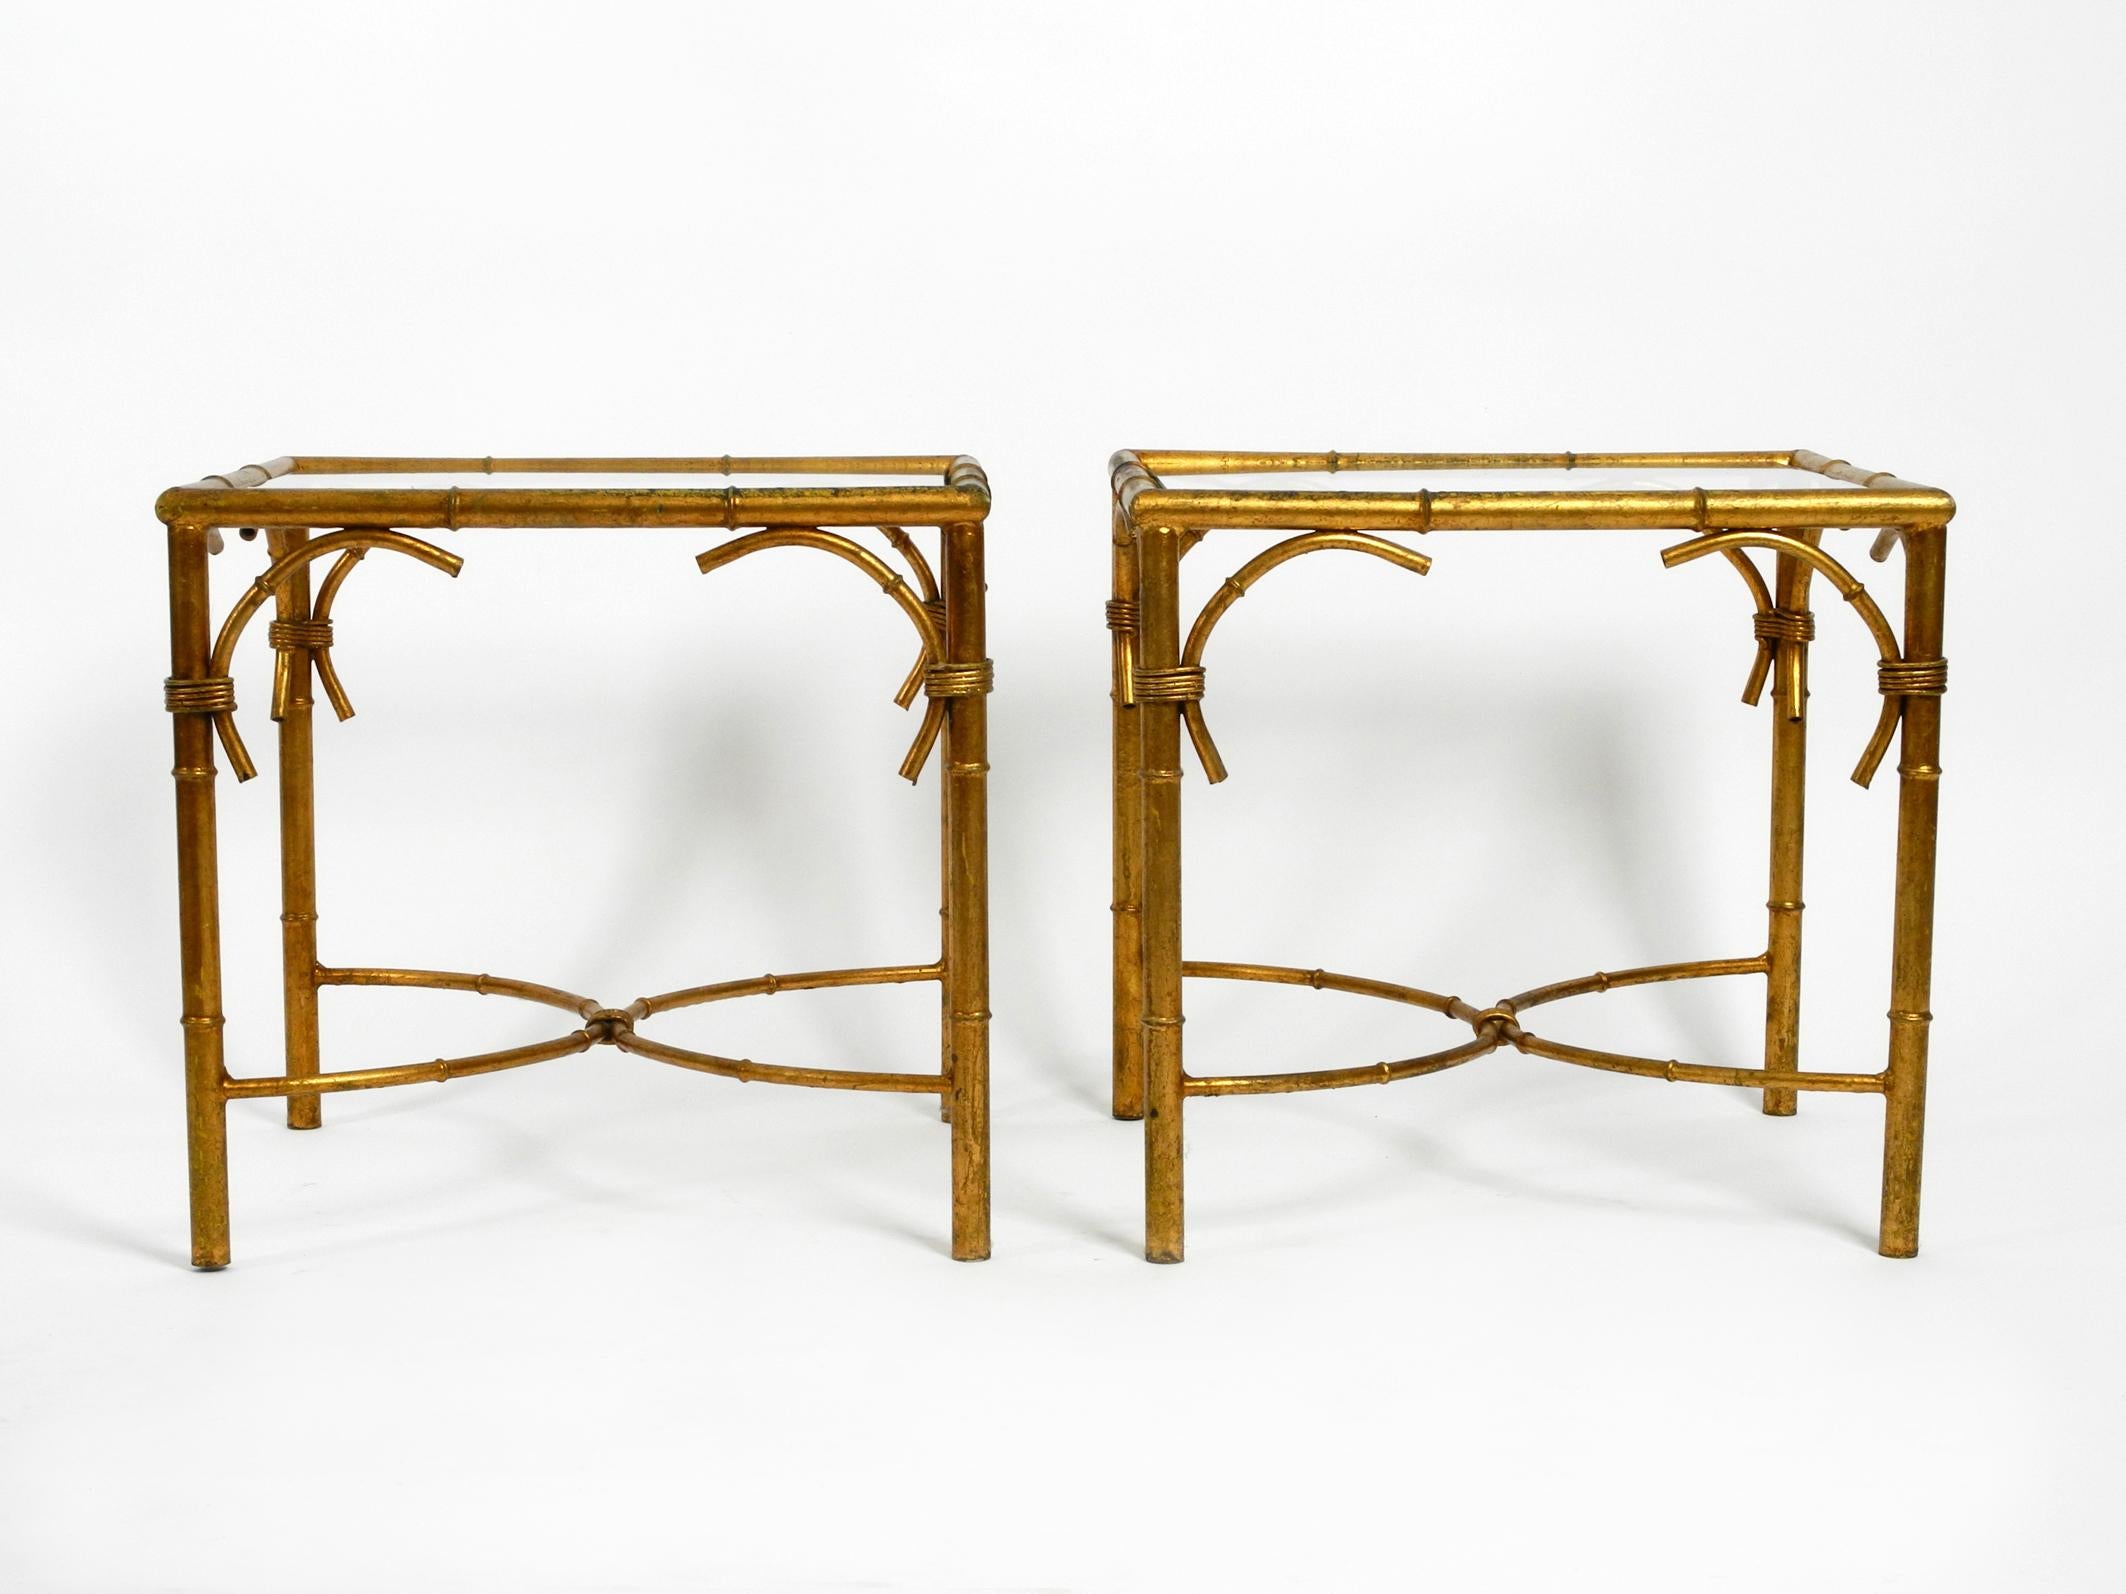 Pair of beautiful 1970s gold-plated metal glass side or bedside tables by Hans Kögl.
Hans Kögl was a famous light and table designer. 
He worked with natural shapes like palm leaves
and plant shapes. His designs were produced in both countries,